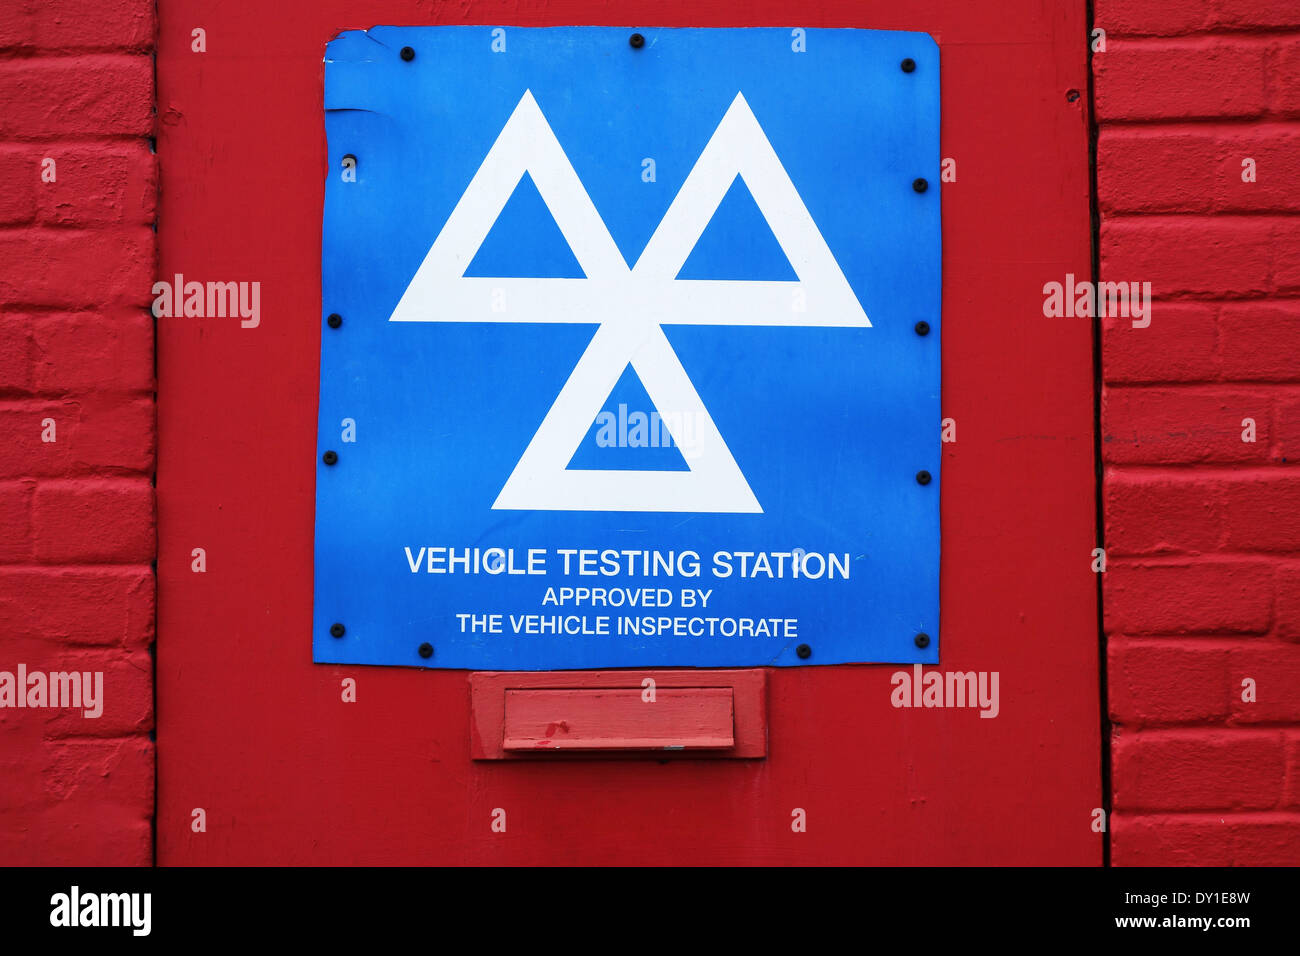 Vehicle Testing Station approved by The Vehicle Inspectorate Stock Photo